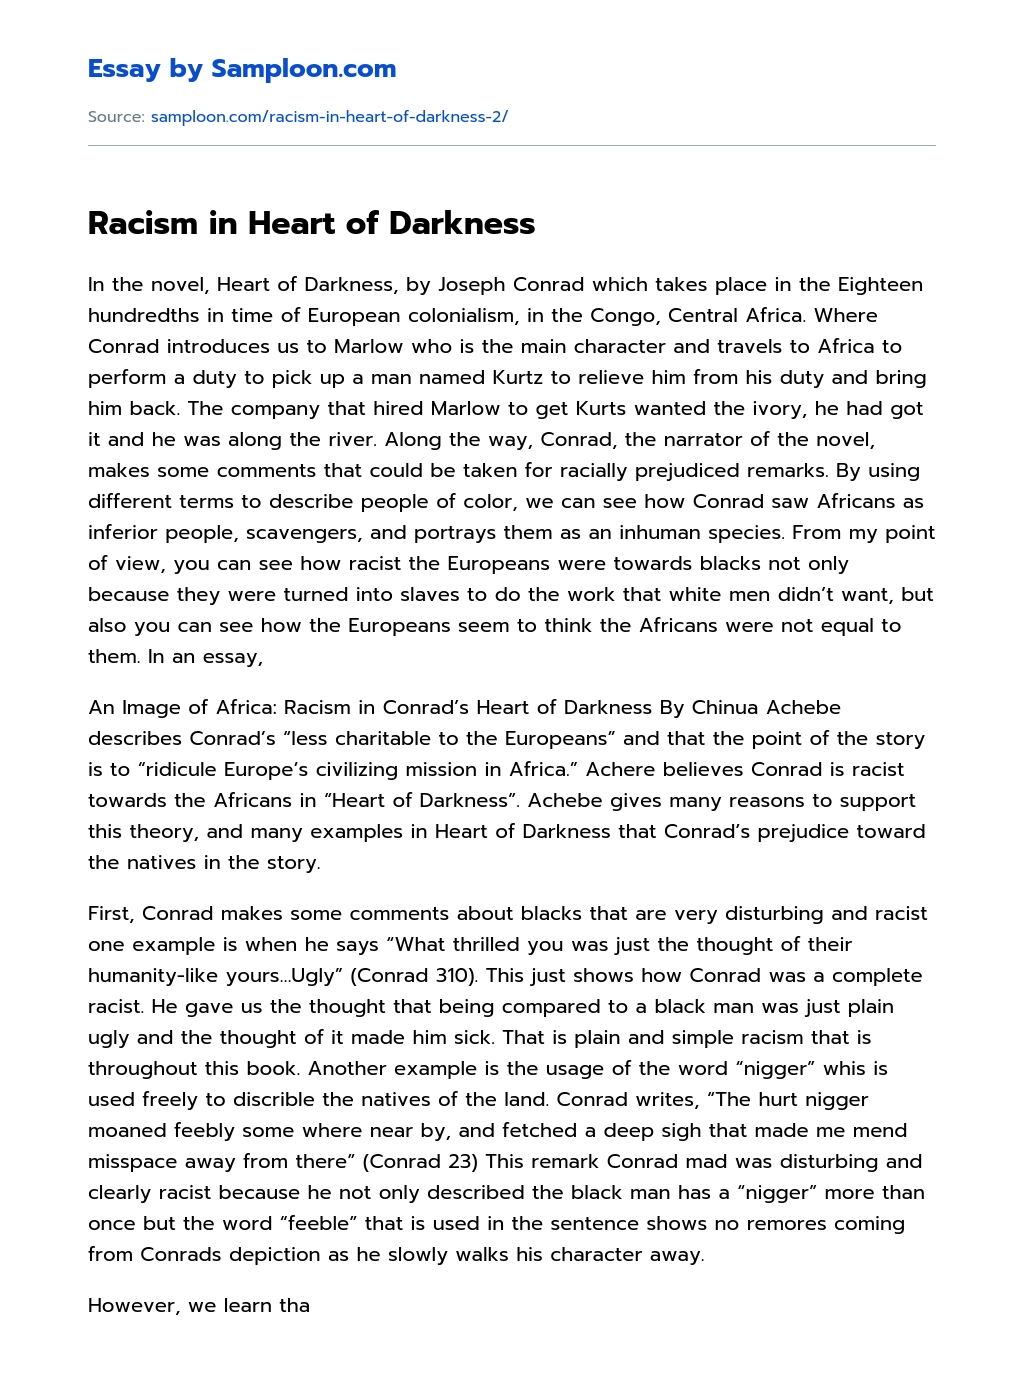 Racism Issue in the Book Heart of Darkness Summary essay